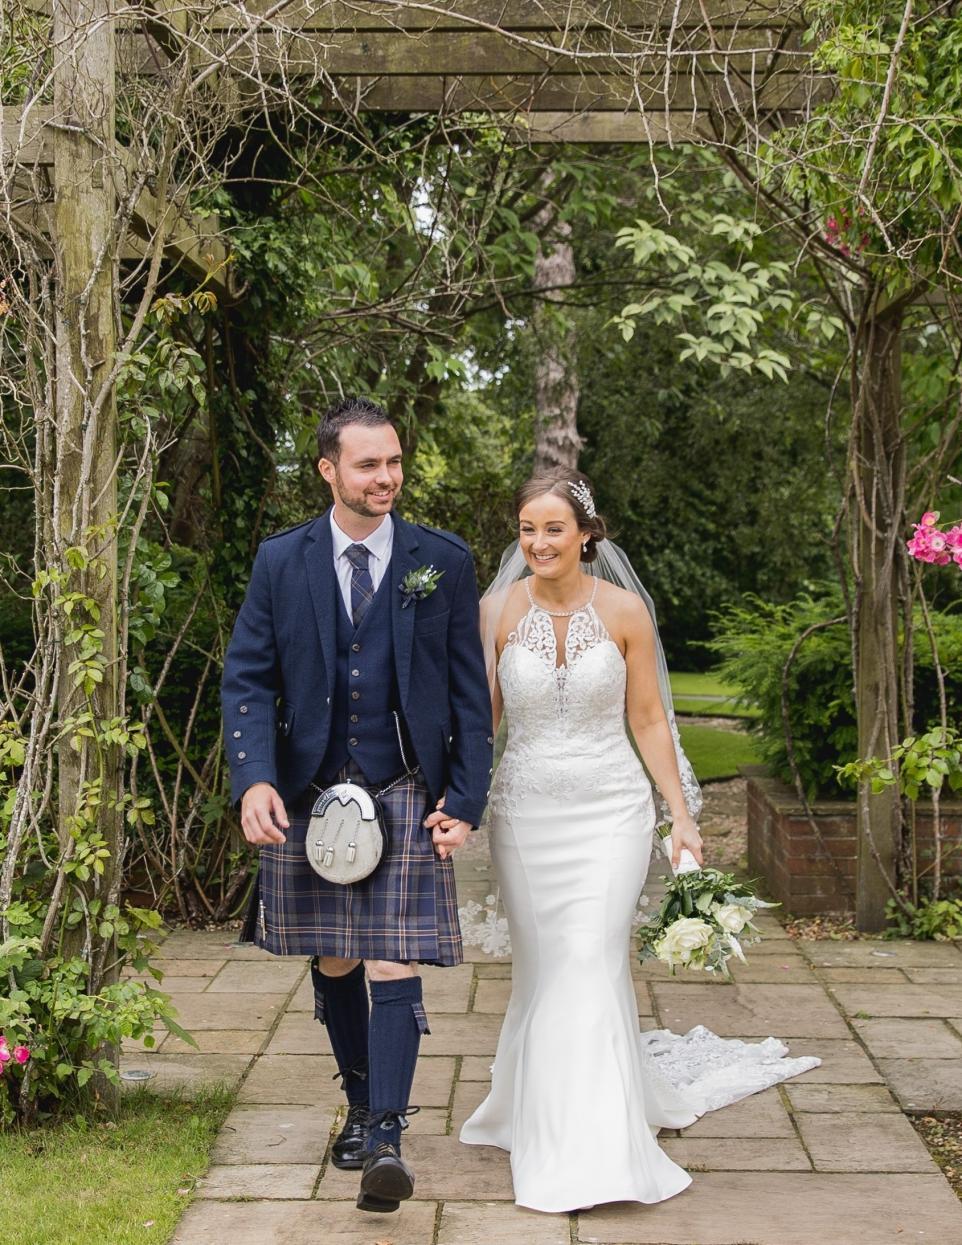 Gayle Meikle of Carlisle Road, Blackwood, and Mark Guthrie of West Mosside Farm, Kilmarnock, recently tied the knot at Kirkmuirhill Parish Church. The celebration continued with a reception at Western House Hotel in Ayr